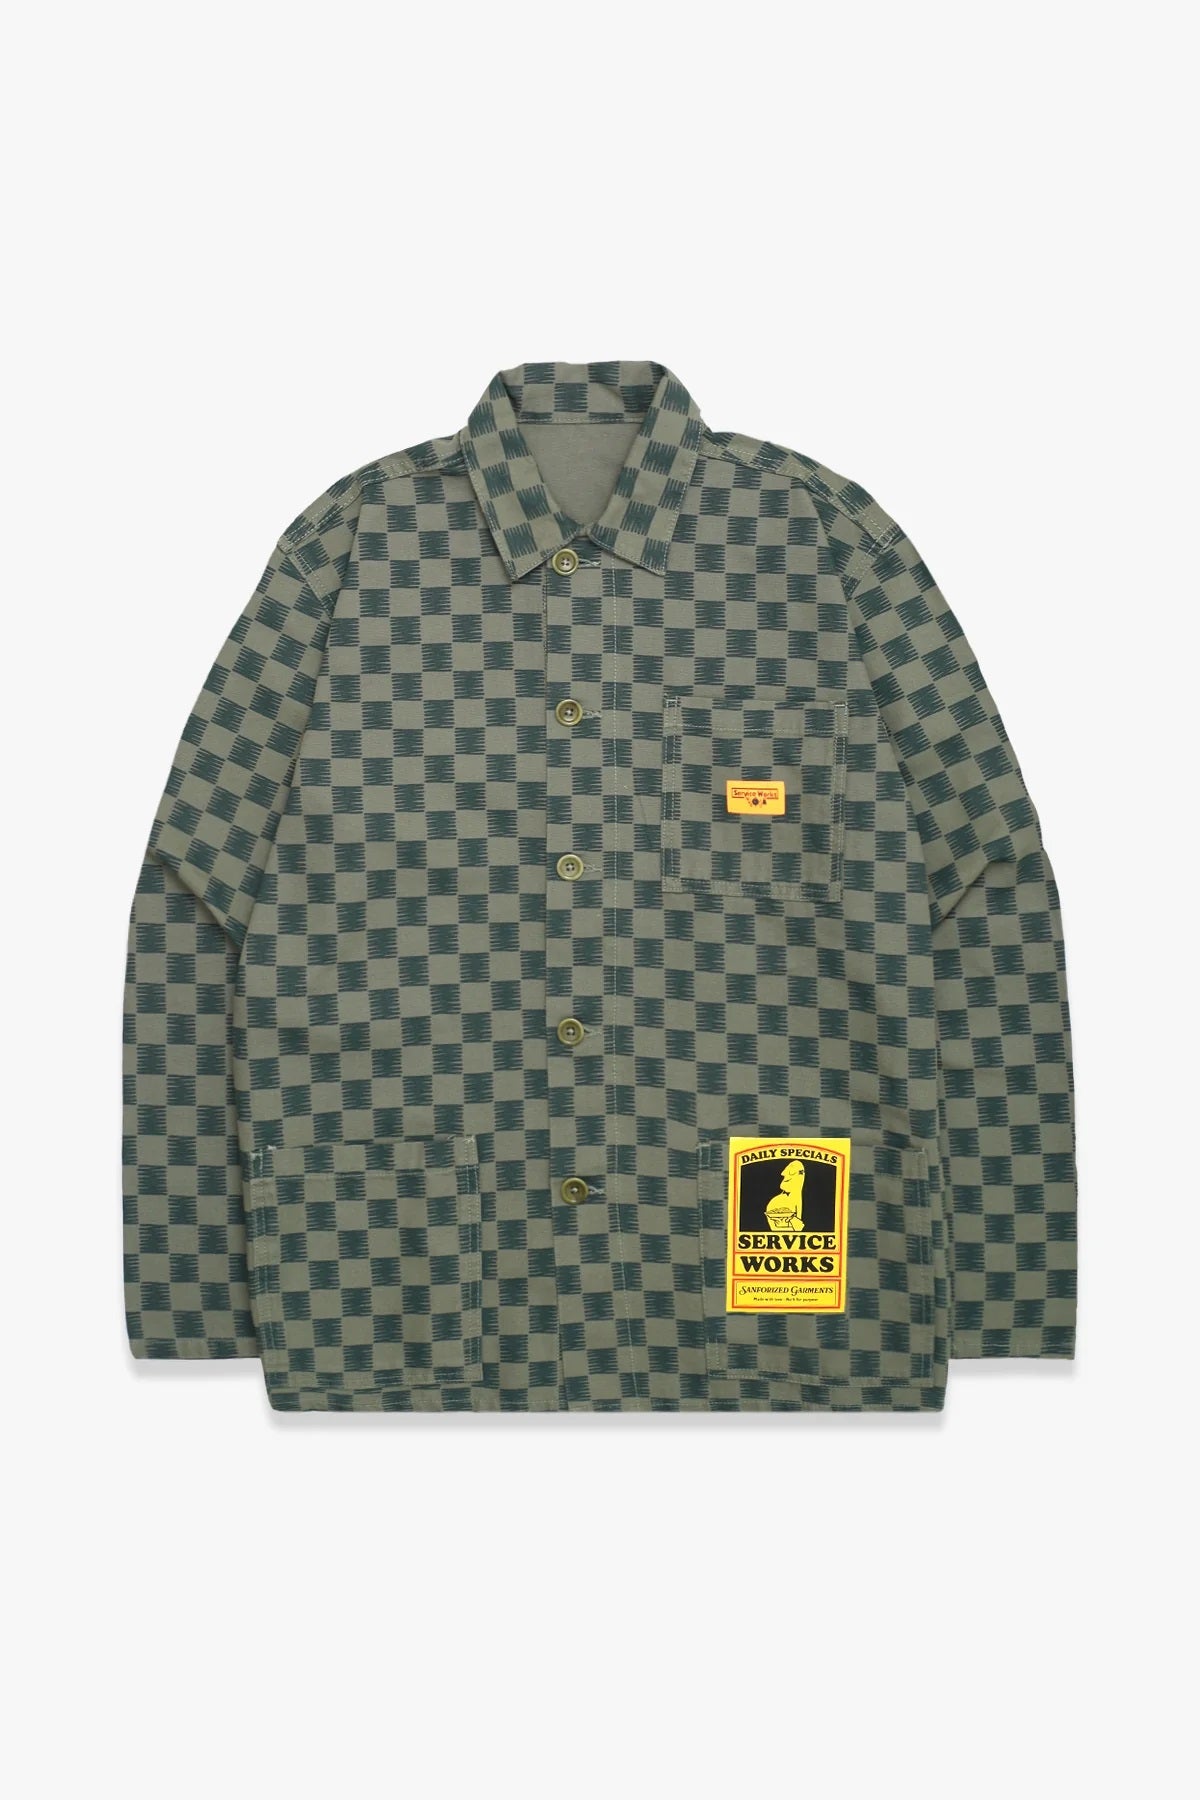 Service Works Canvas Coverall Jacket Groen Heren